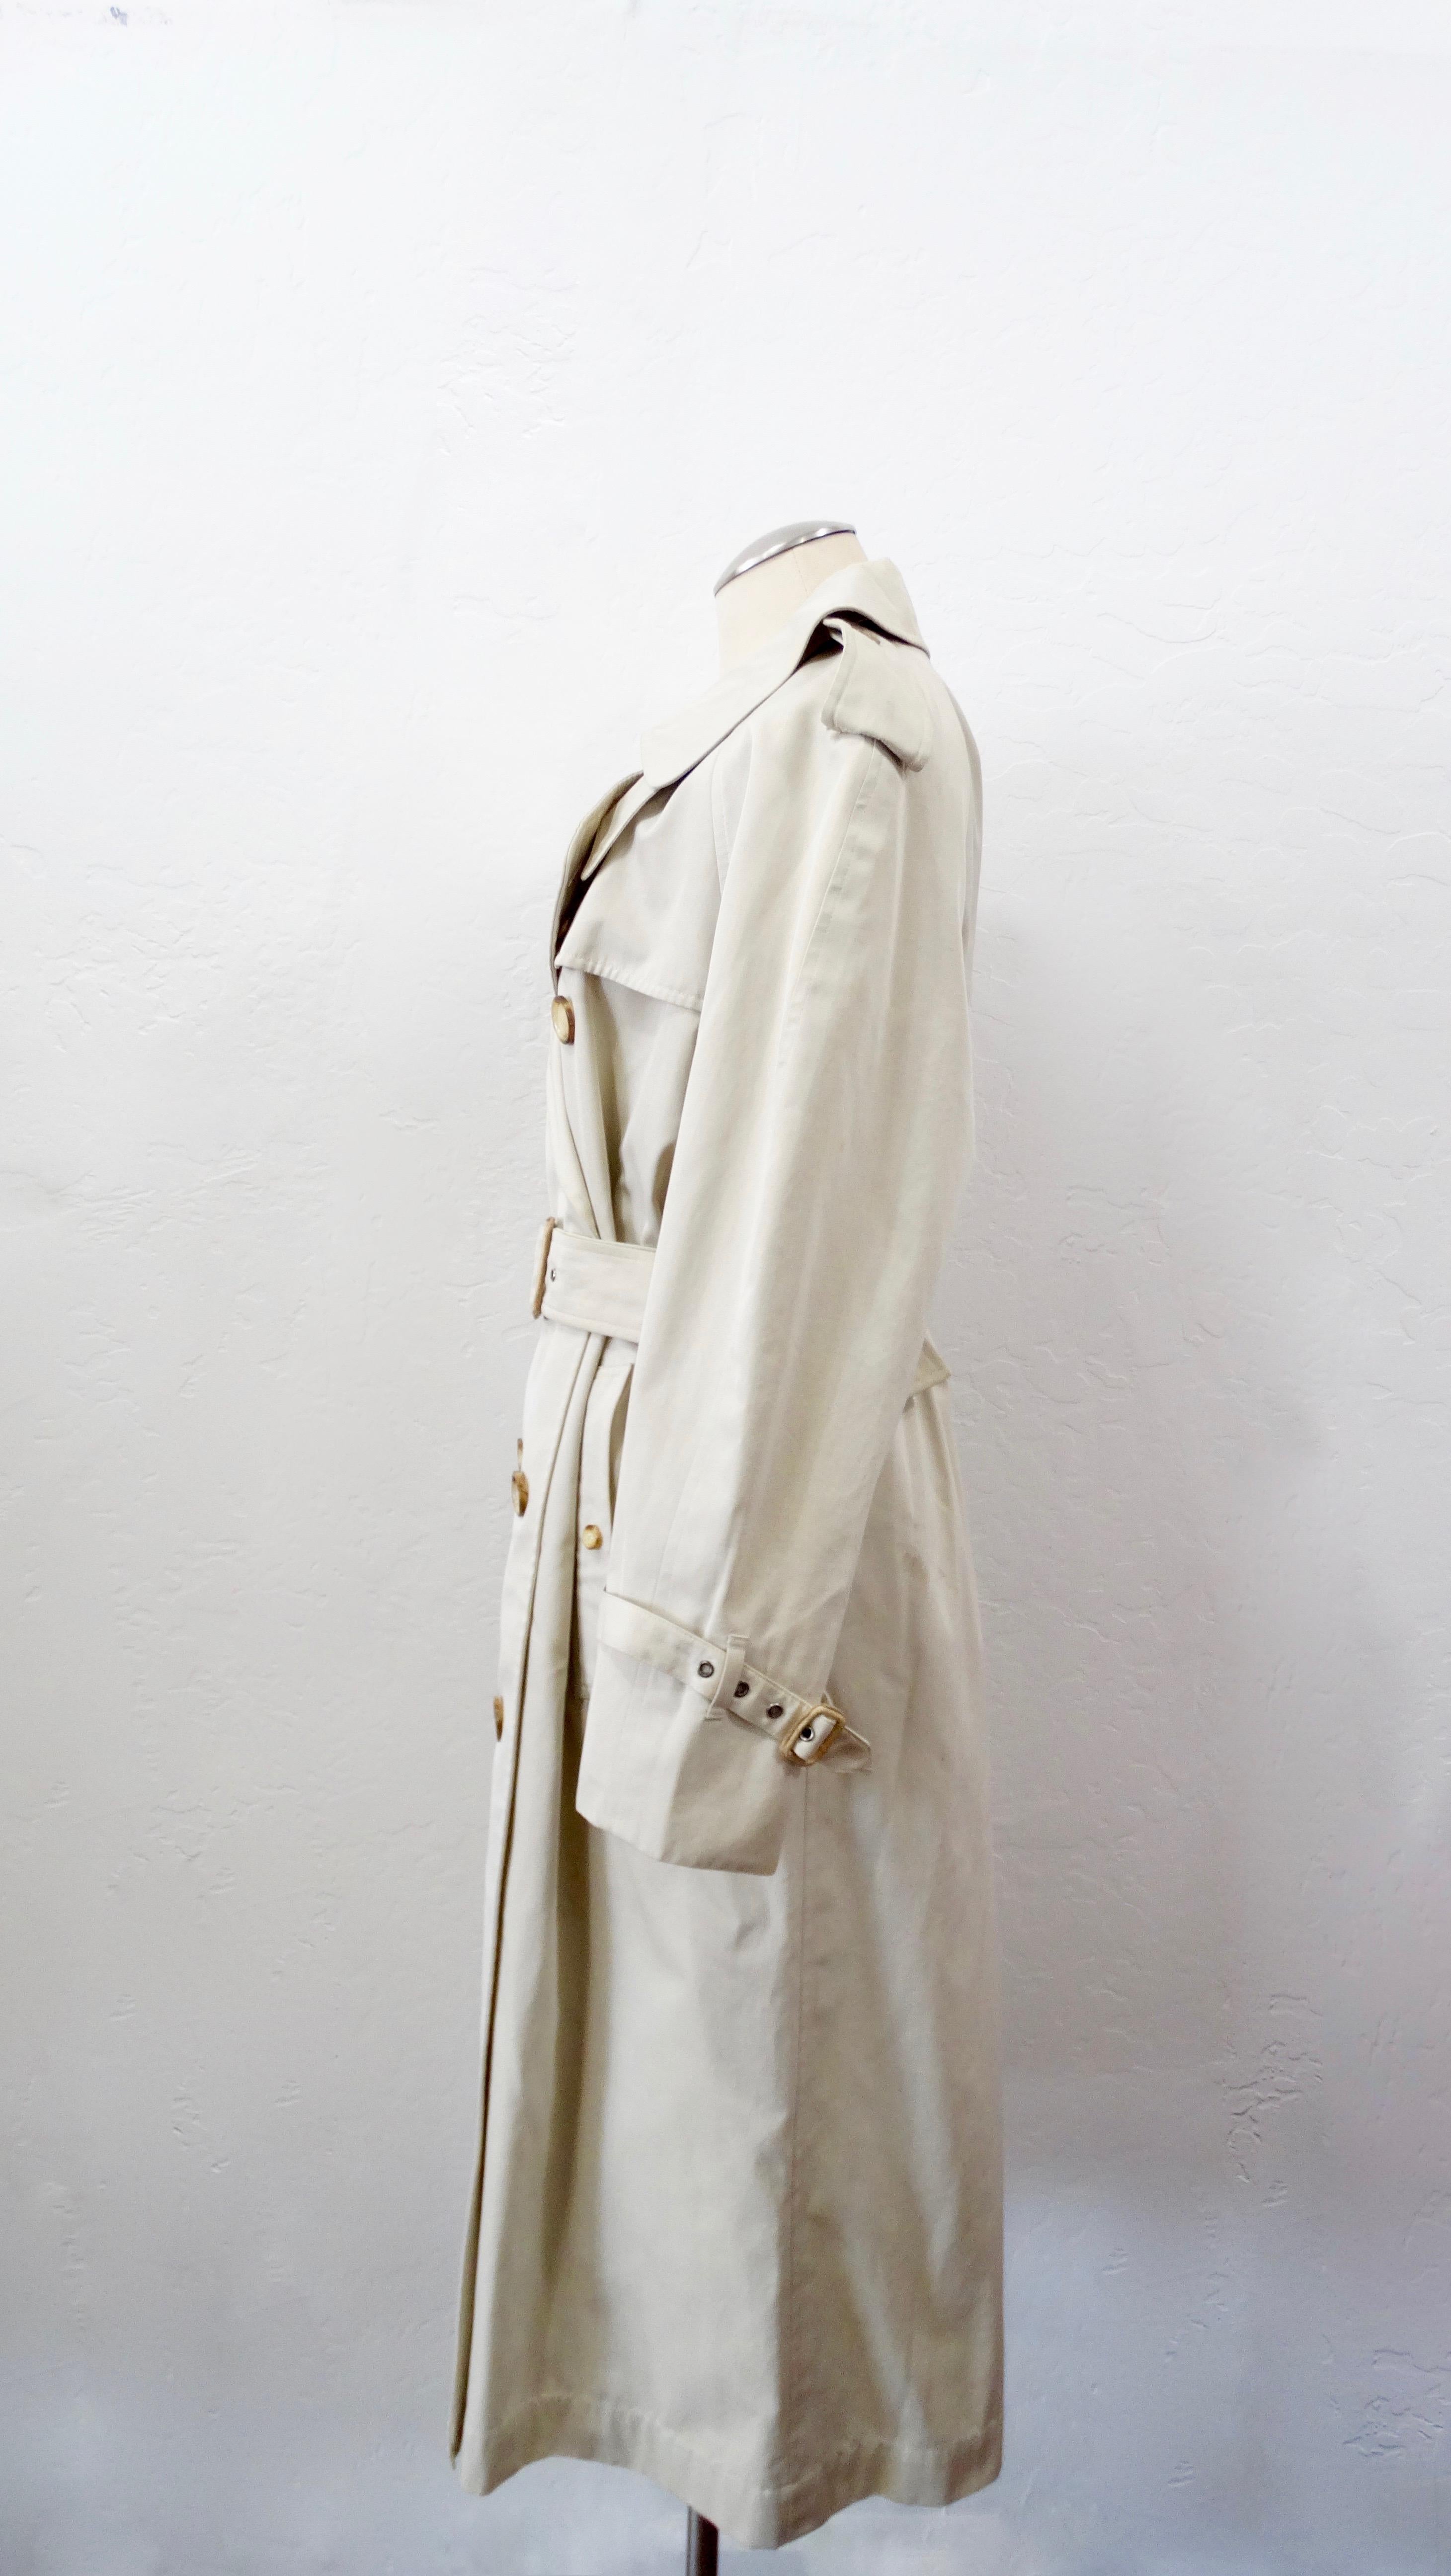 Your perfect trench coat is here! Circa 1990s, this timeless Yves Saint Laurent trench coat is made of 100% Cotton and is a gorgeous soft tan color. Features epaulettes on the shoulders, notched lapels, double breasted front tortious shell buttons,